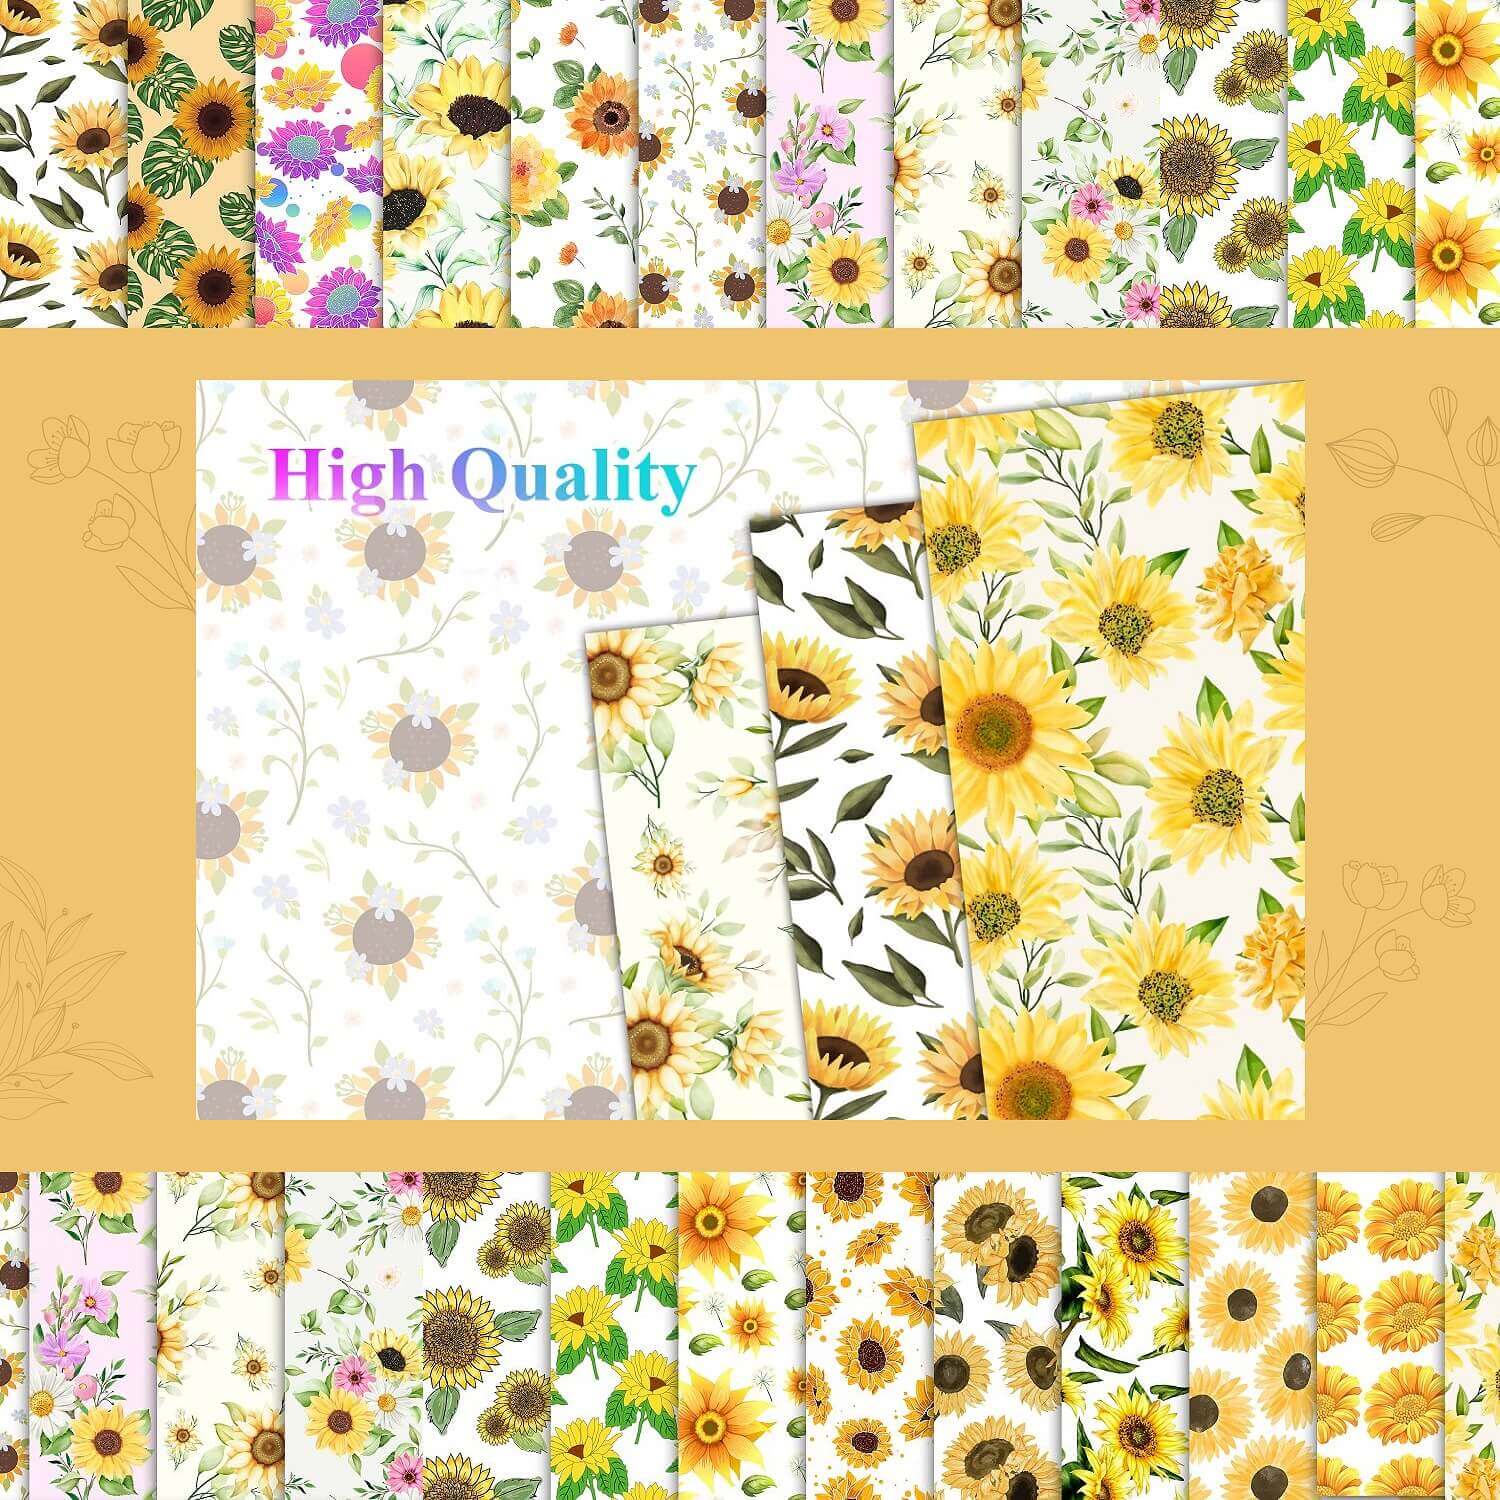 High quality pattern with sunflowers.